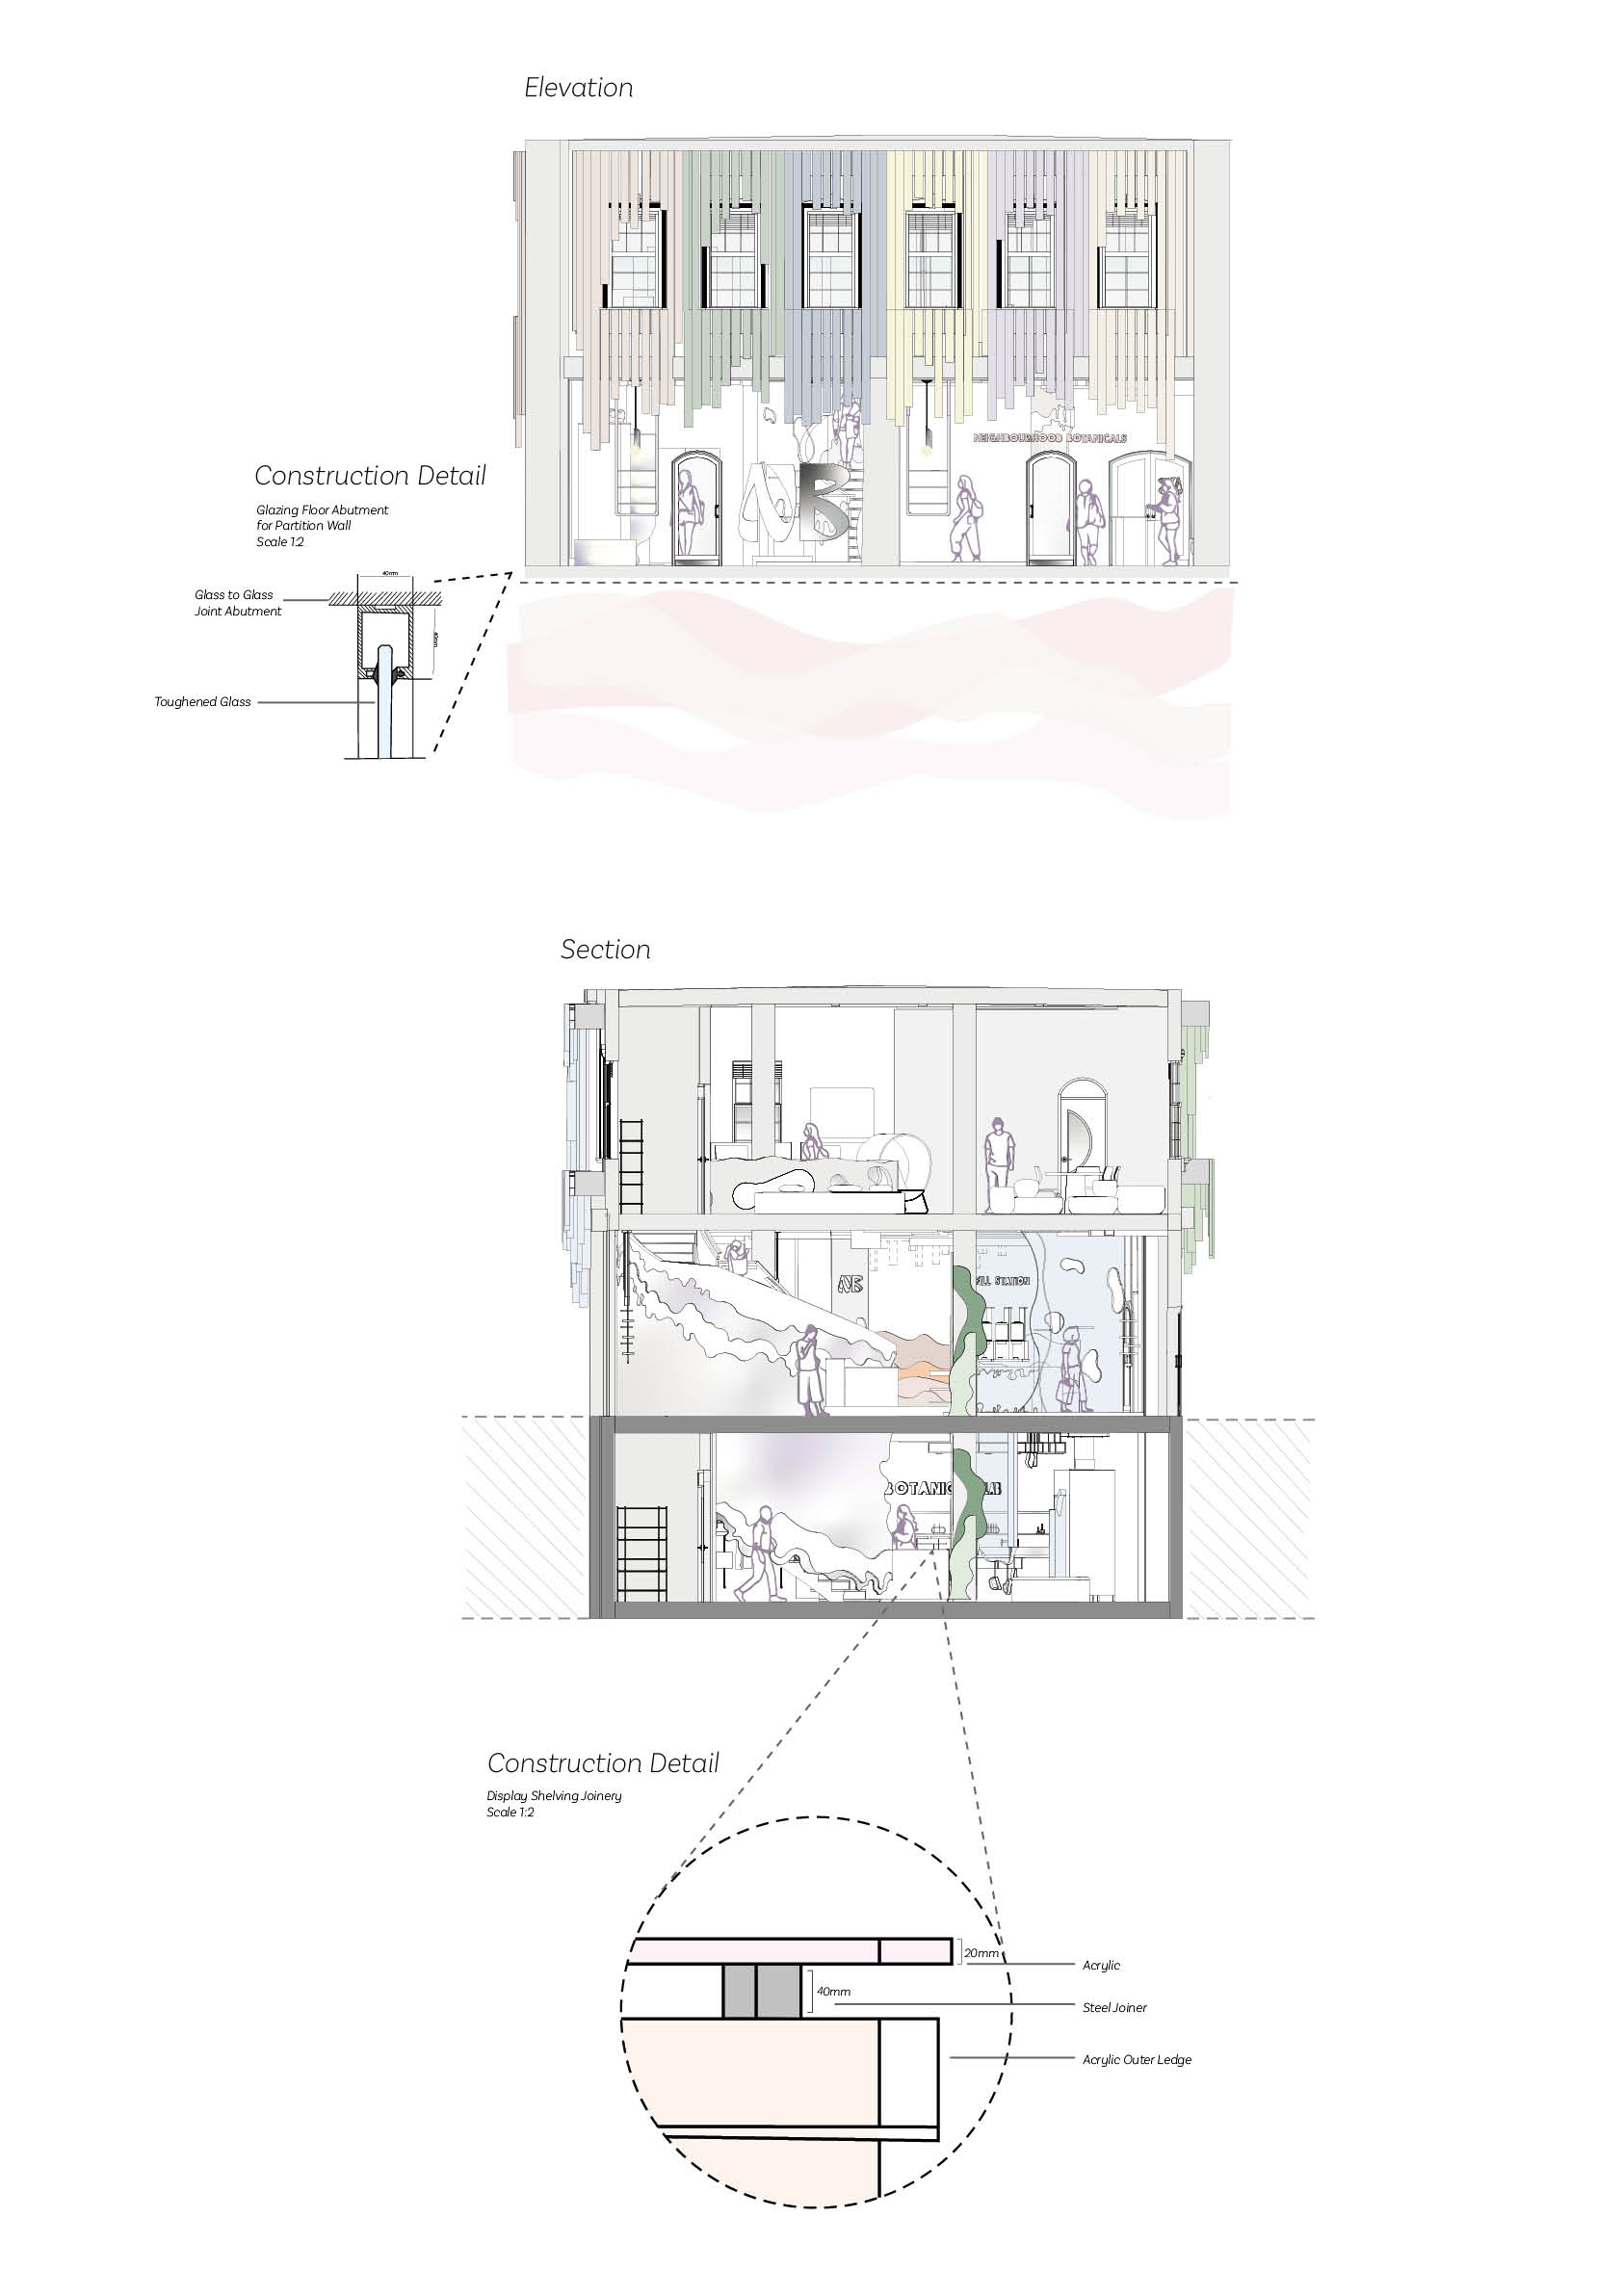 Elevation and Sections renders of the shop that include construction diagrams by Emily Day